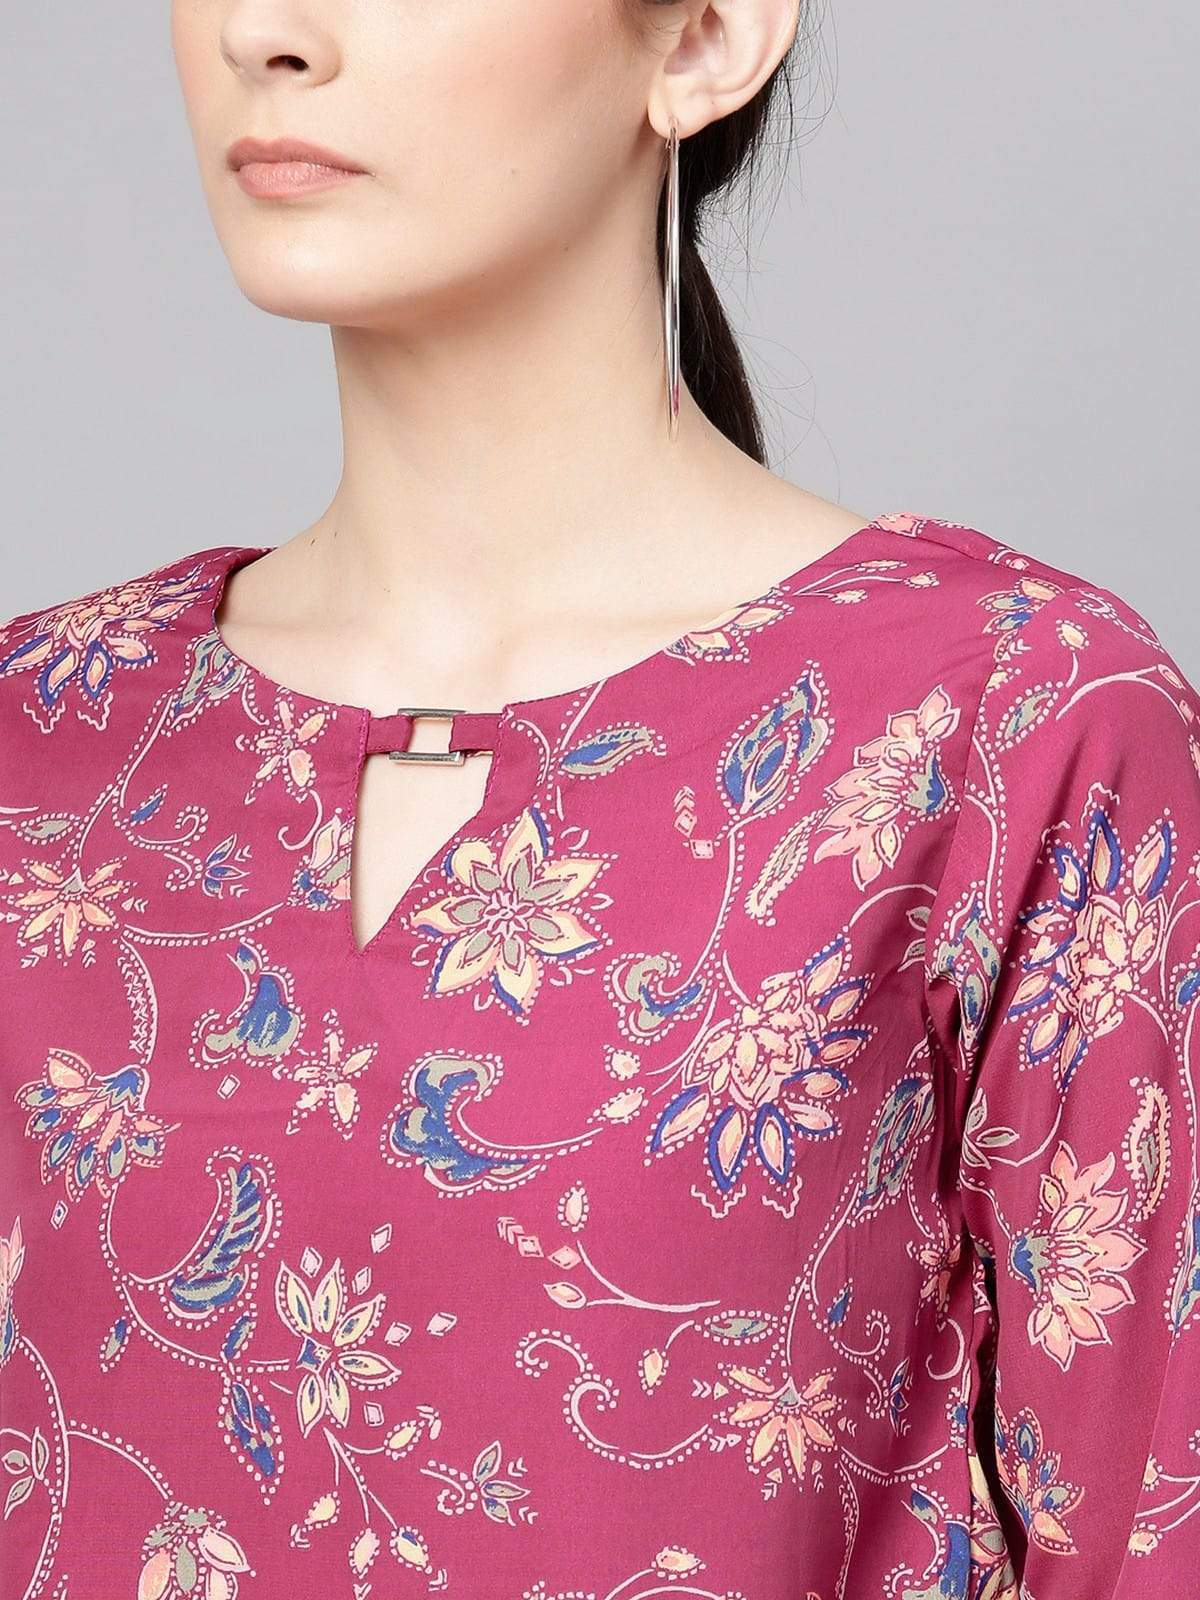 Women's Floral Pipe Top - Pannkh